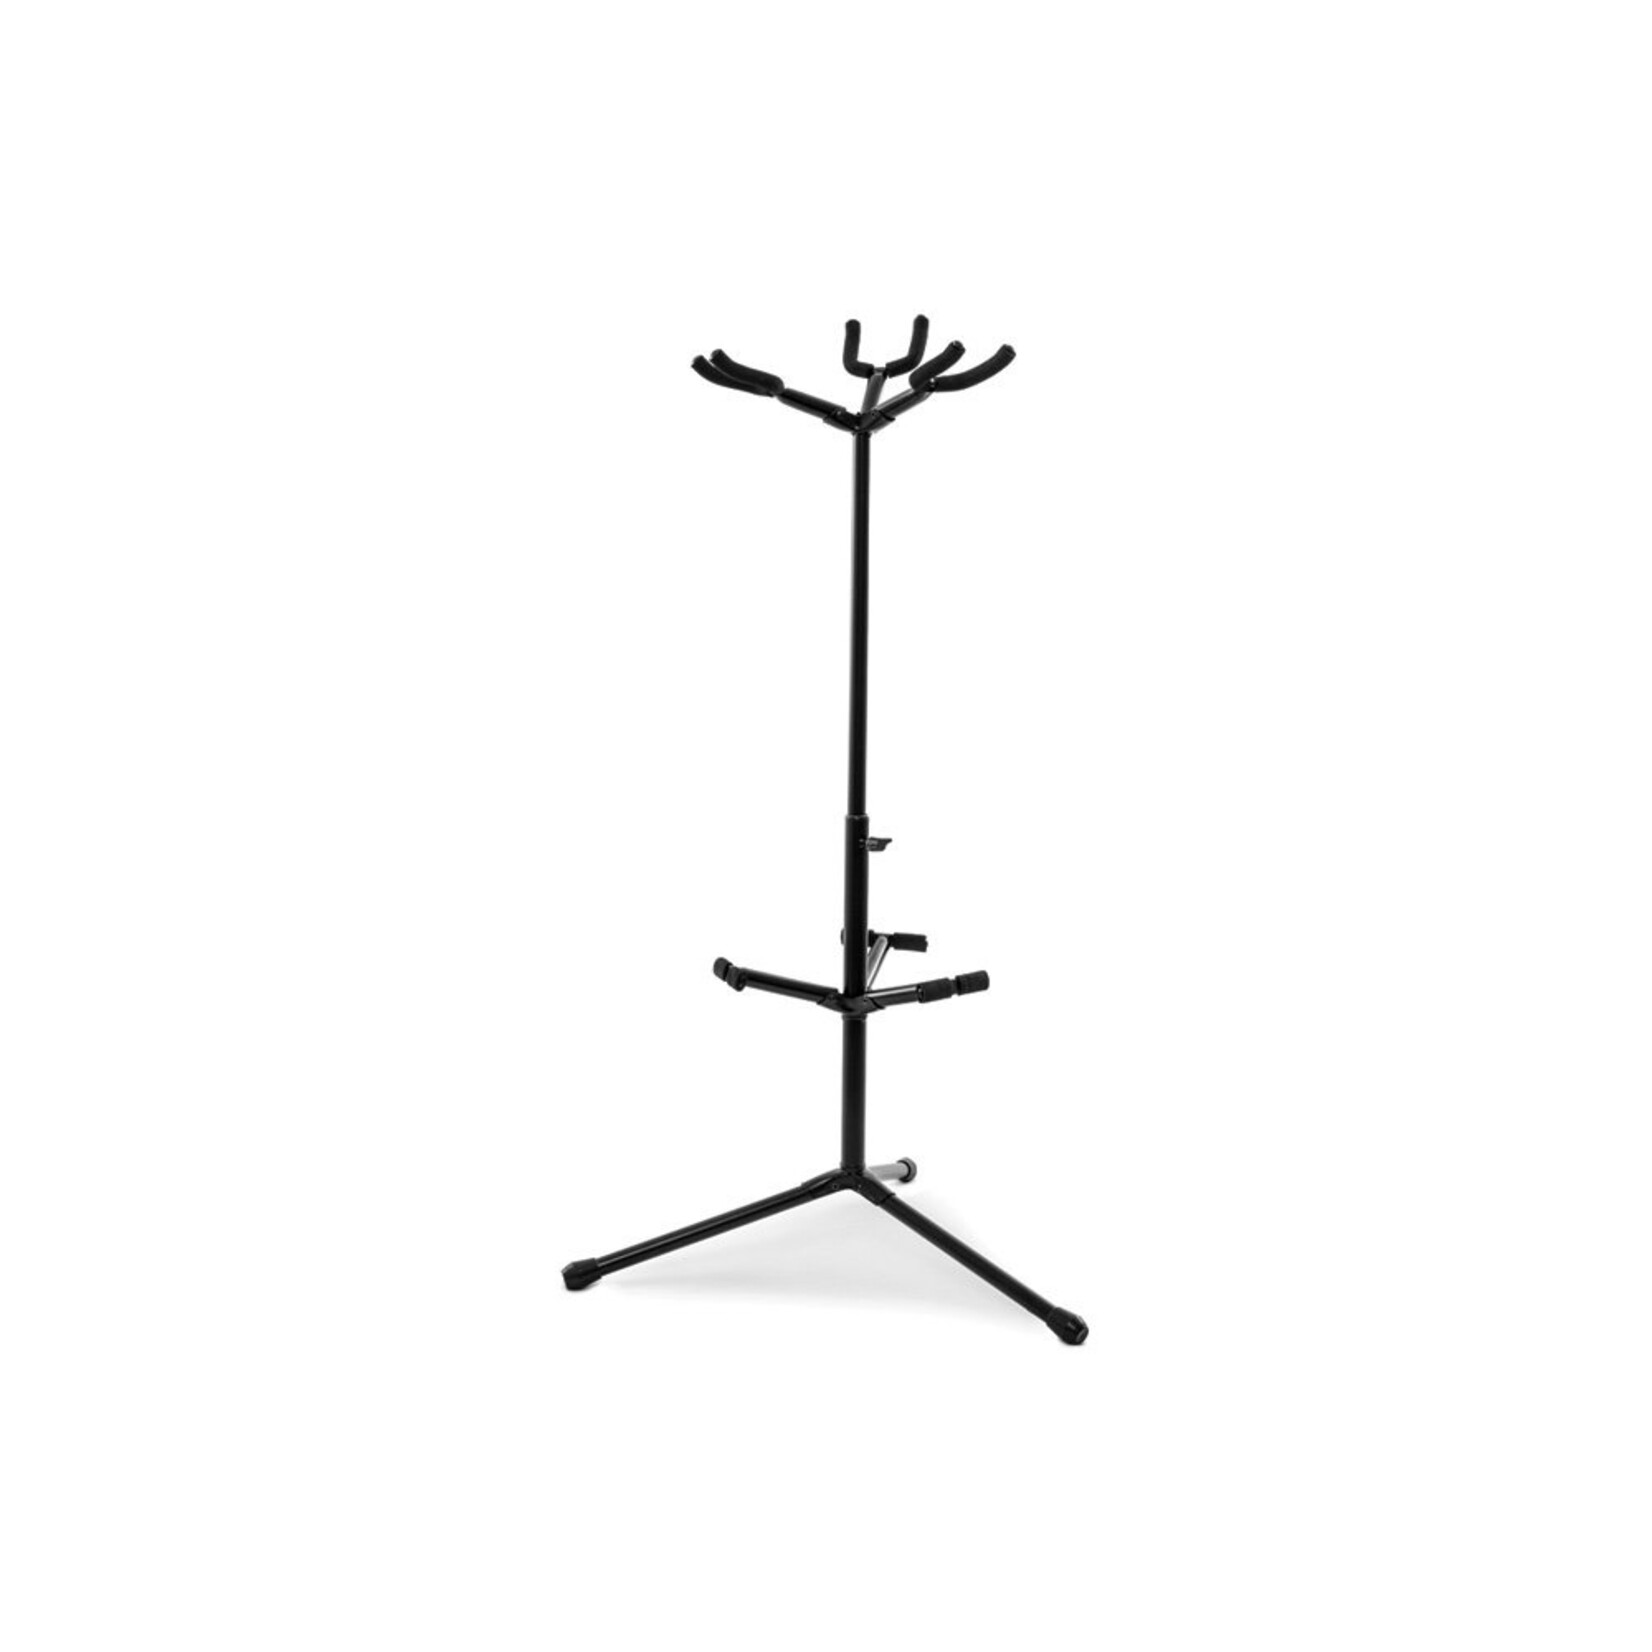 Nomad NGS-2213 Triple Guitar Stand - Black